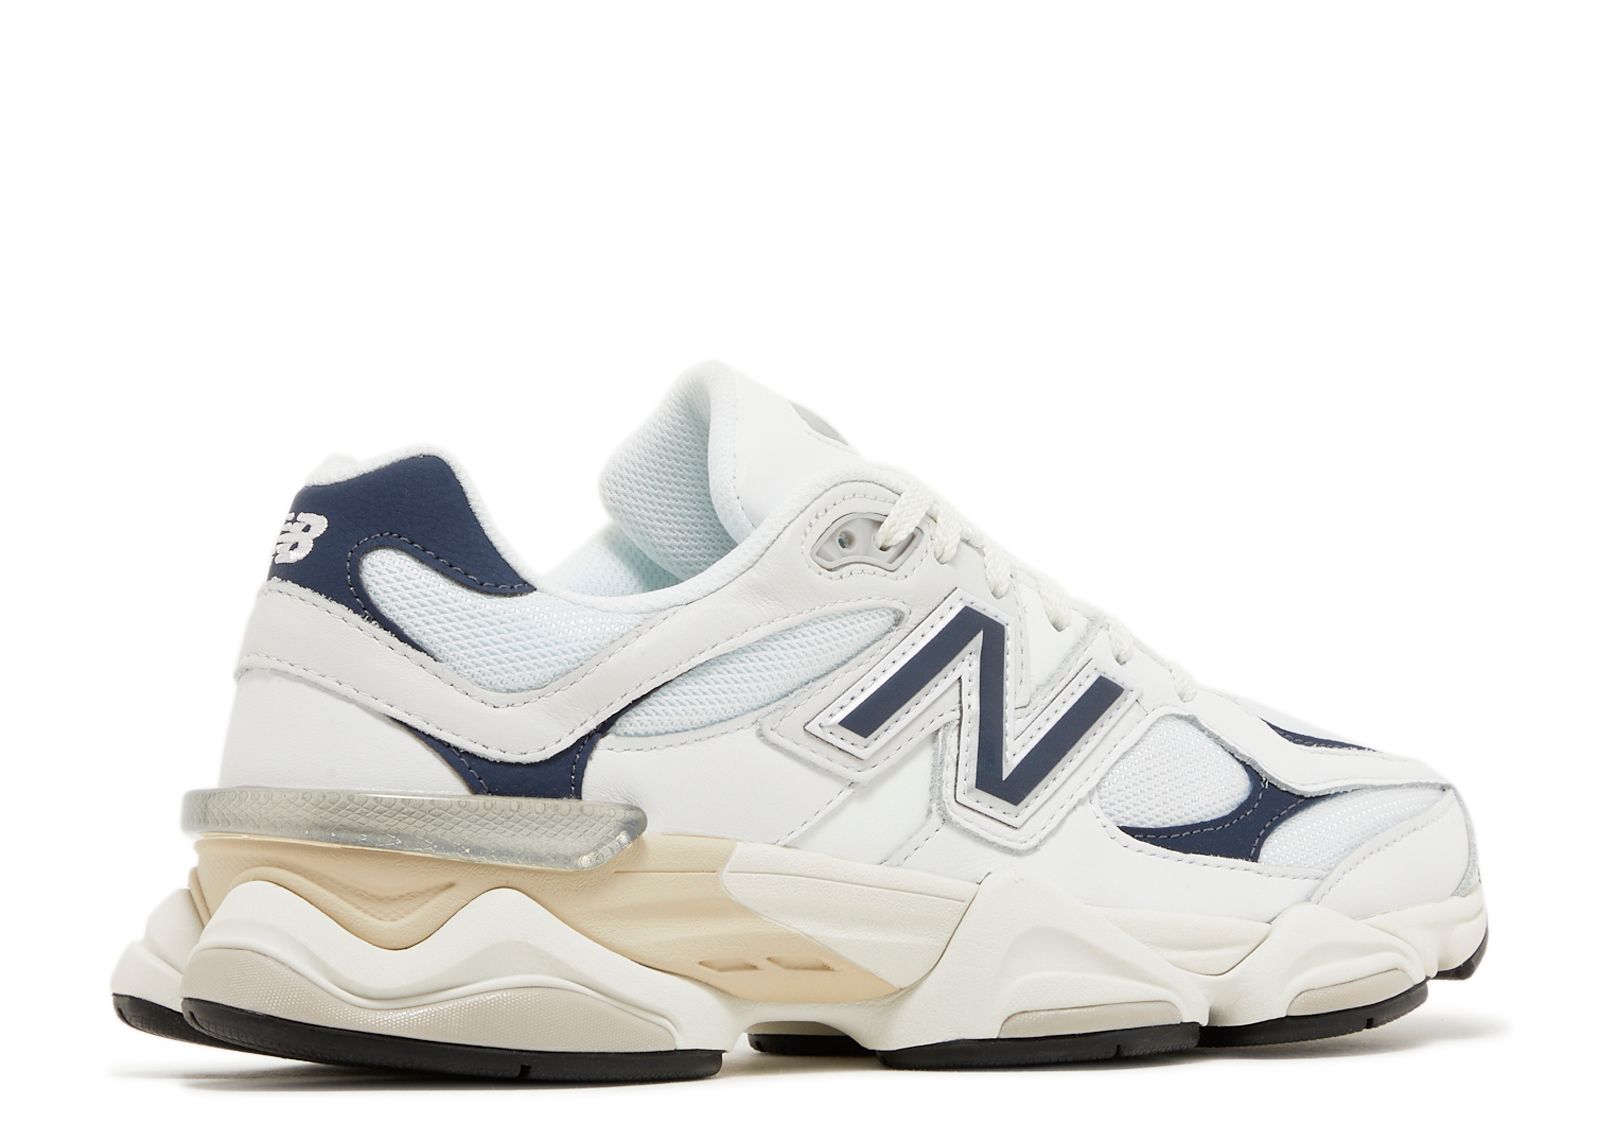 New Balance 9060 sneakers in white with navy detail